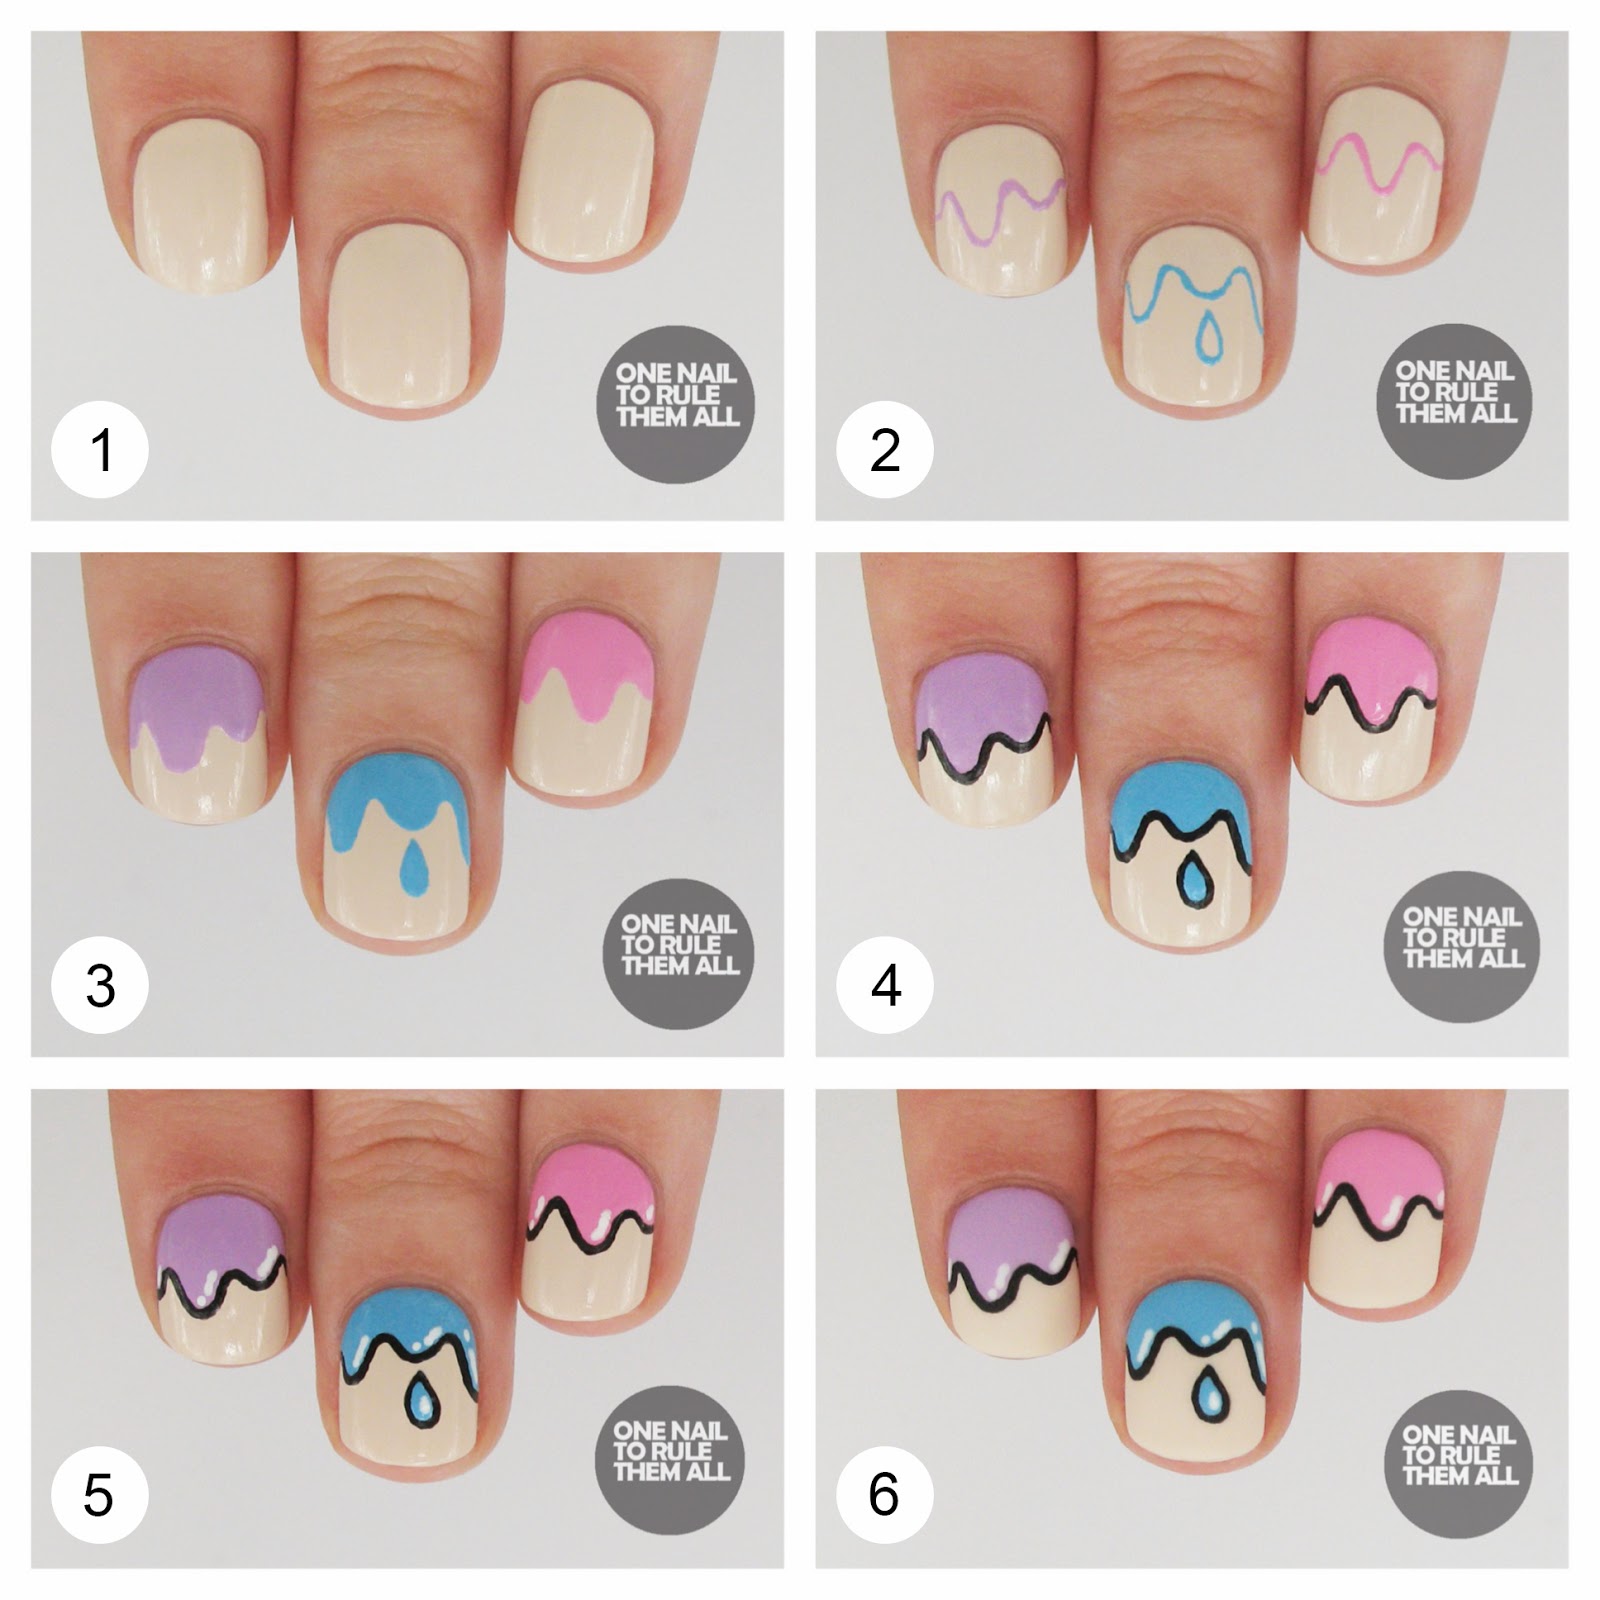 One Nail To Rule Them All: Tutorial Tuesday: Drips